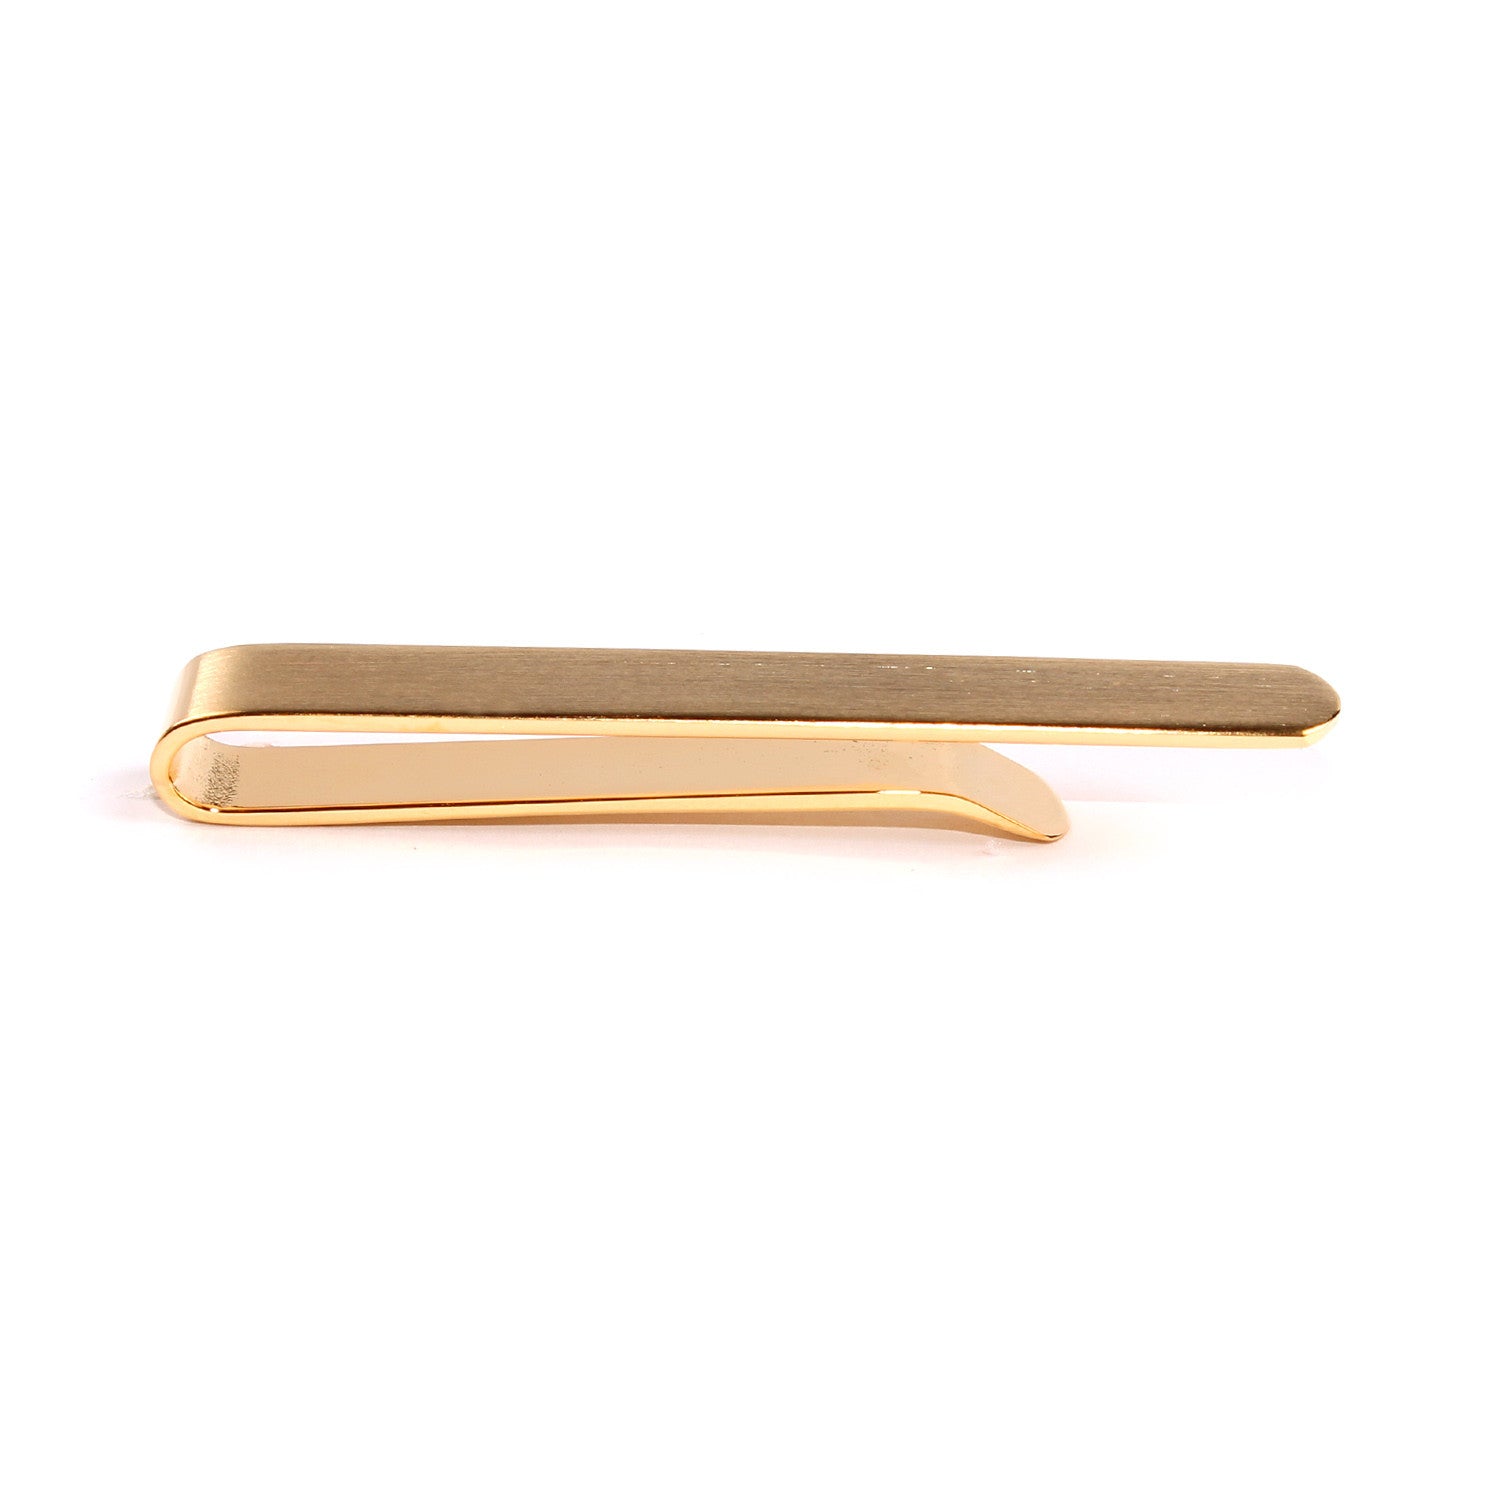 Brushed Gold Round Clasp Tie Bar